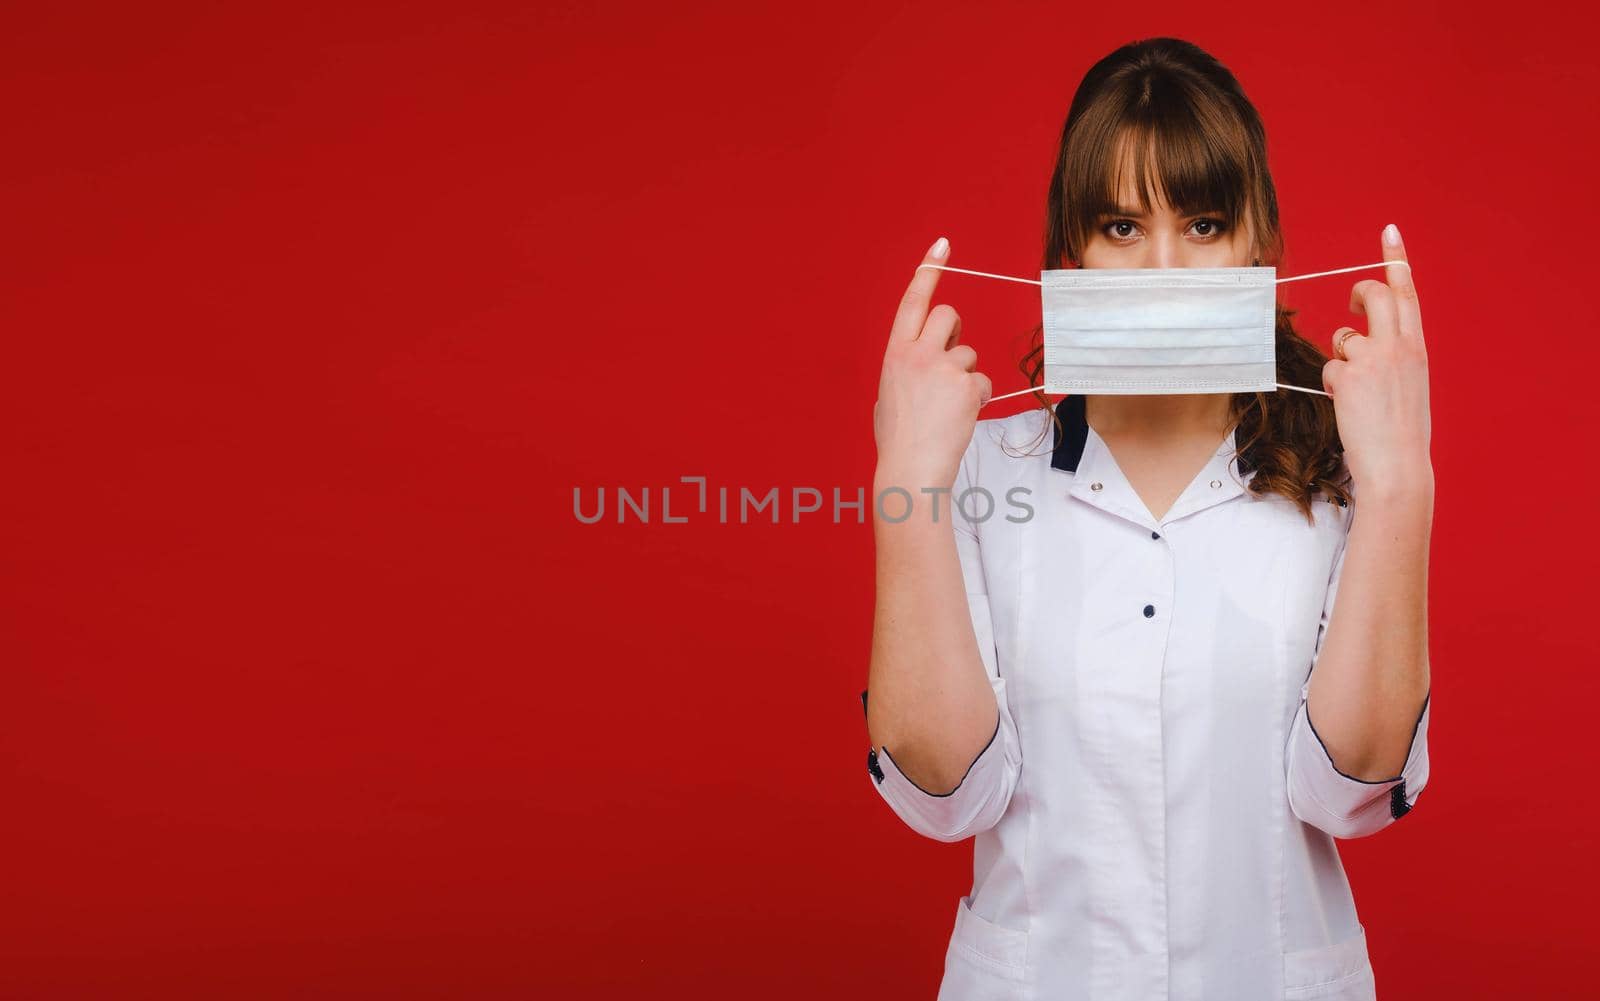 A female doctor stands on a red background and holds a medical mask in her hands.